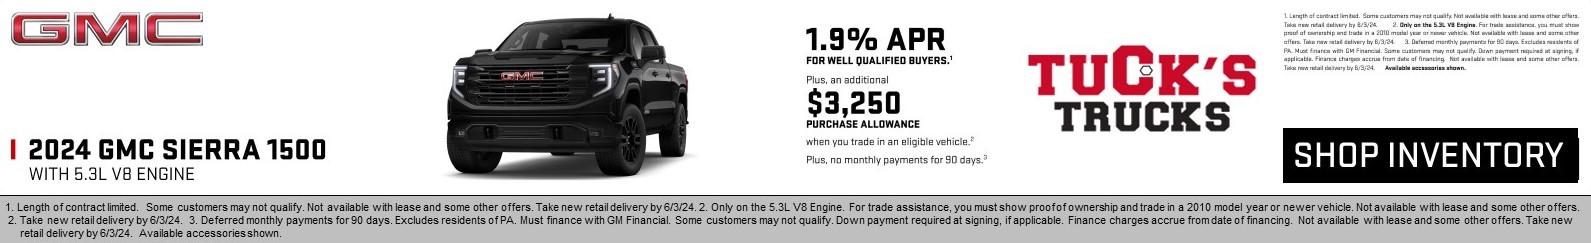 1. Length of contract limited.  Some customers may not qualify. Not available with lease and some other offers. Take new retail delivery by 6/3/24.  2. Only on the 5.3L V8 Engine. For trade assistance, you must show proof of ownership and trade in a 2010 model year or newer vehicle. Not available with lease and some other offers. Take new retail delivery by 6/3/24. 3. Deferred monthly payments for 90 days. Excludes residents of PA. Must finance with GM Financial. Some customers may not qualify. Down payment required at signing, if applicable. Finance charges accrue from date of financing.  Not available with lease and some other offers. Take new retail delivery by 6/3/24. Available accessories shown.